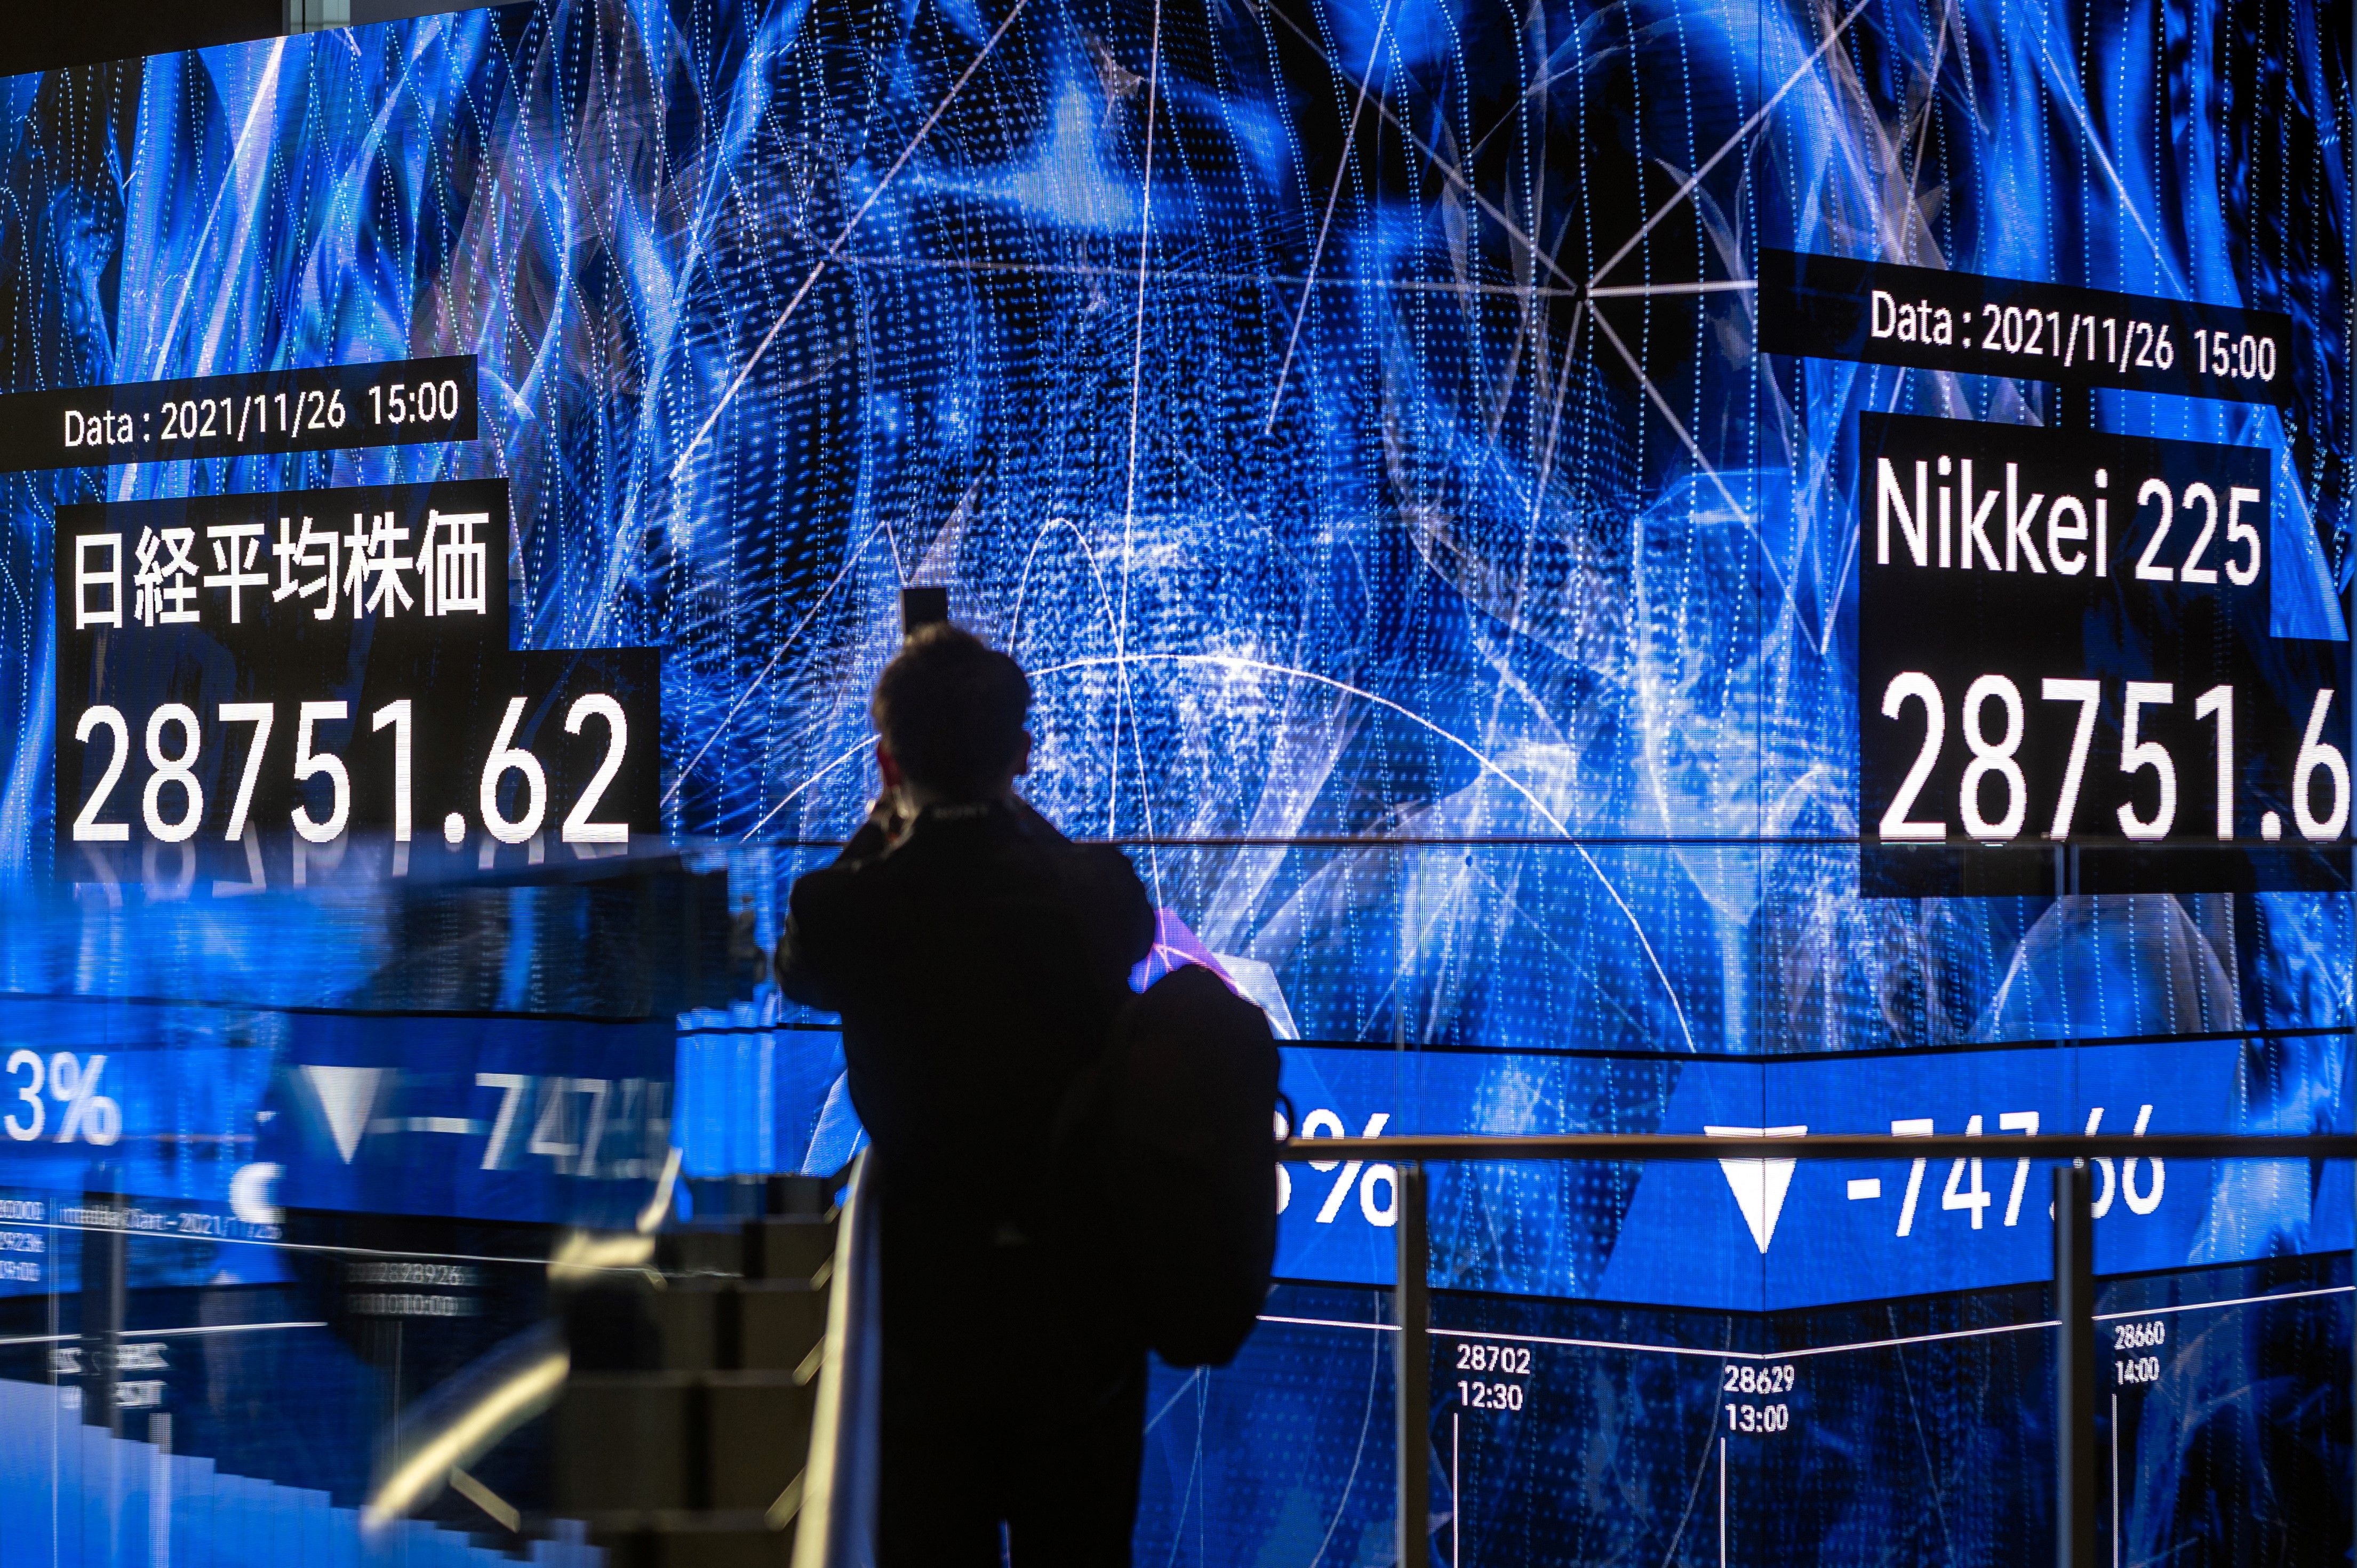 A photographer takes pictures of an electronic quotation board displaying the Nikkei 225 index of the Tokyo Stock Exchange in Tokyo on November 26, 2021.